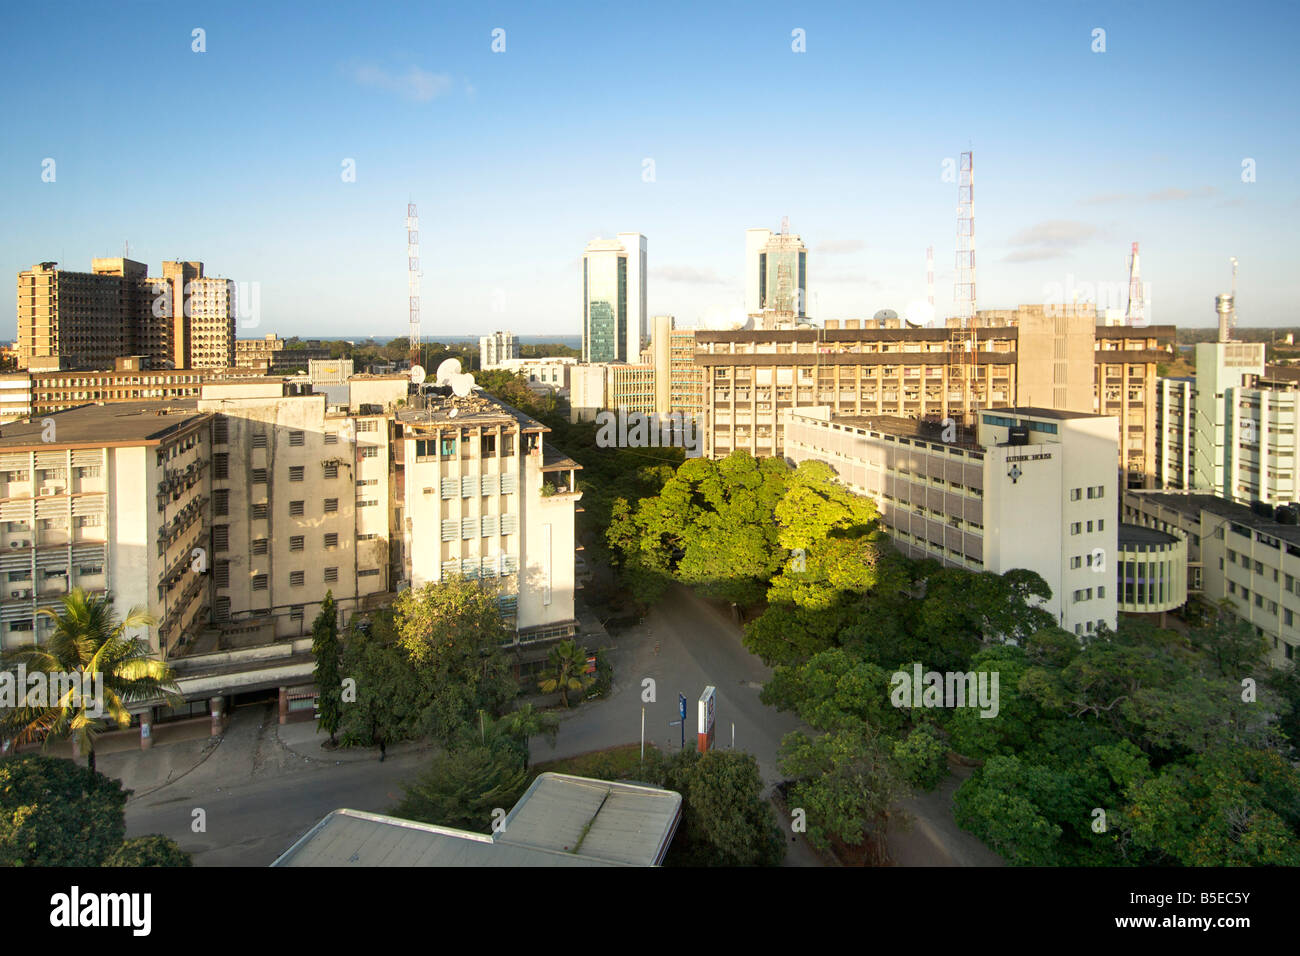 View of the buildings in Dar es Salaam, the capital of Tanzania. Stock Photo